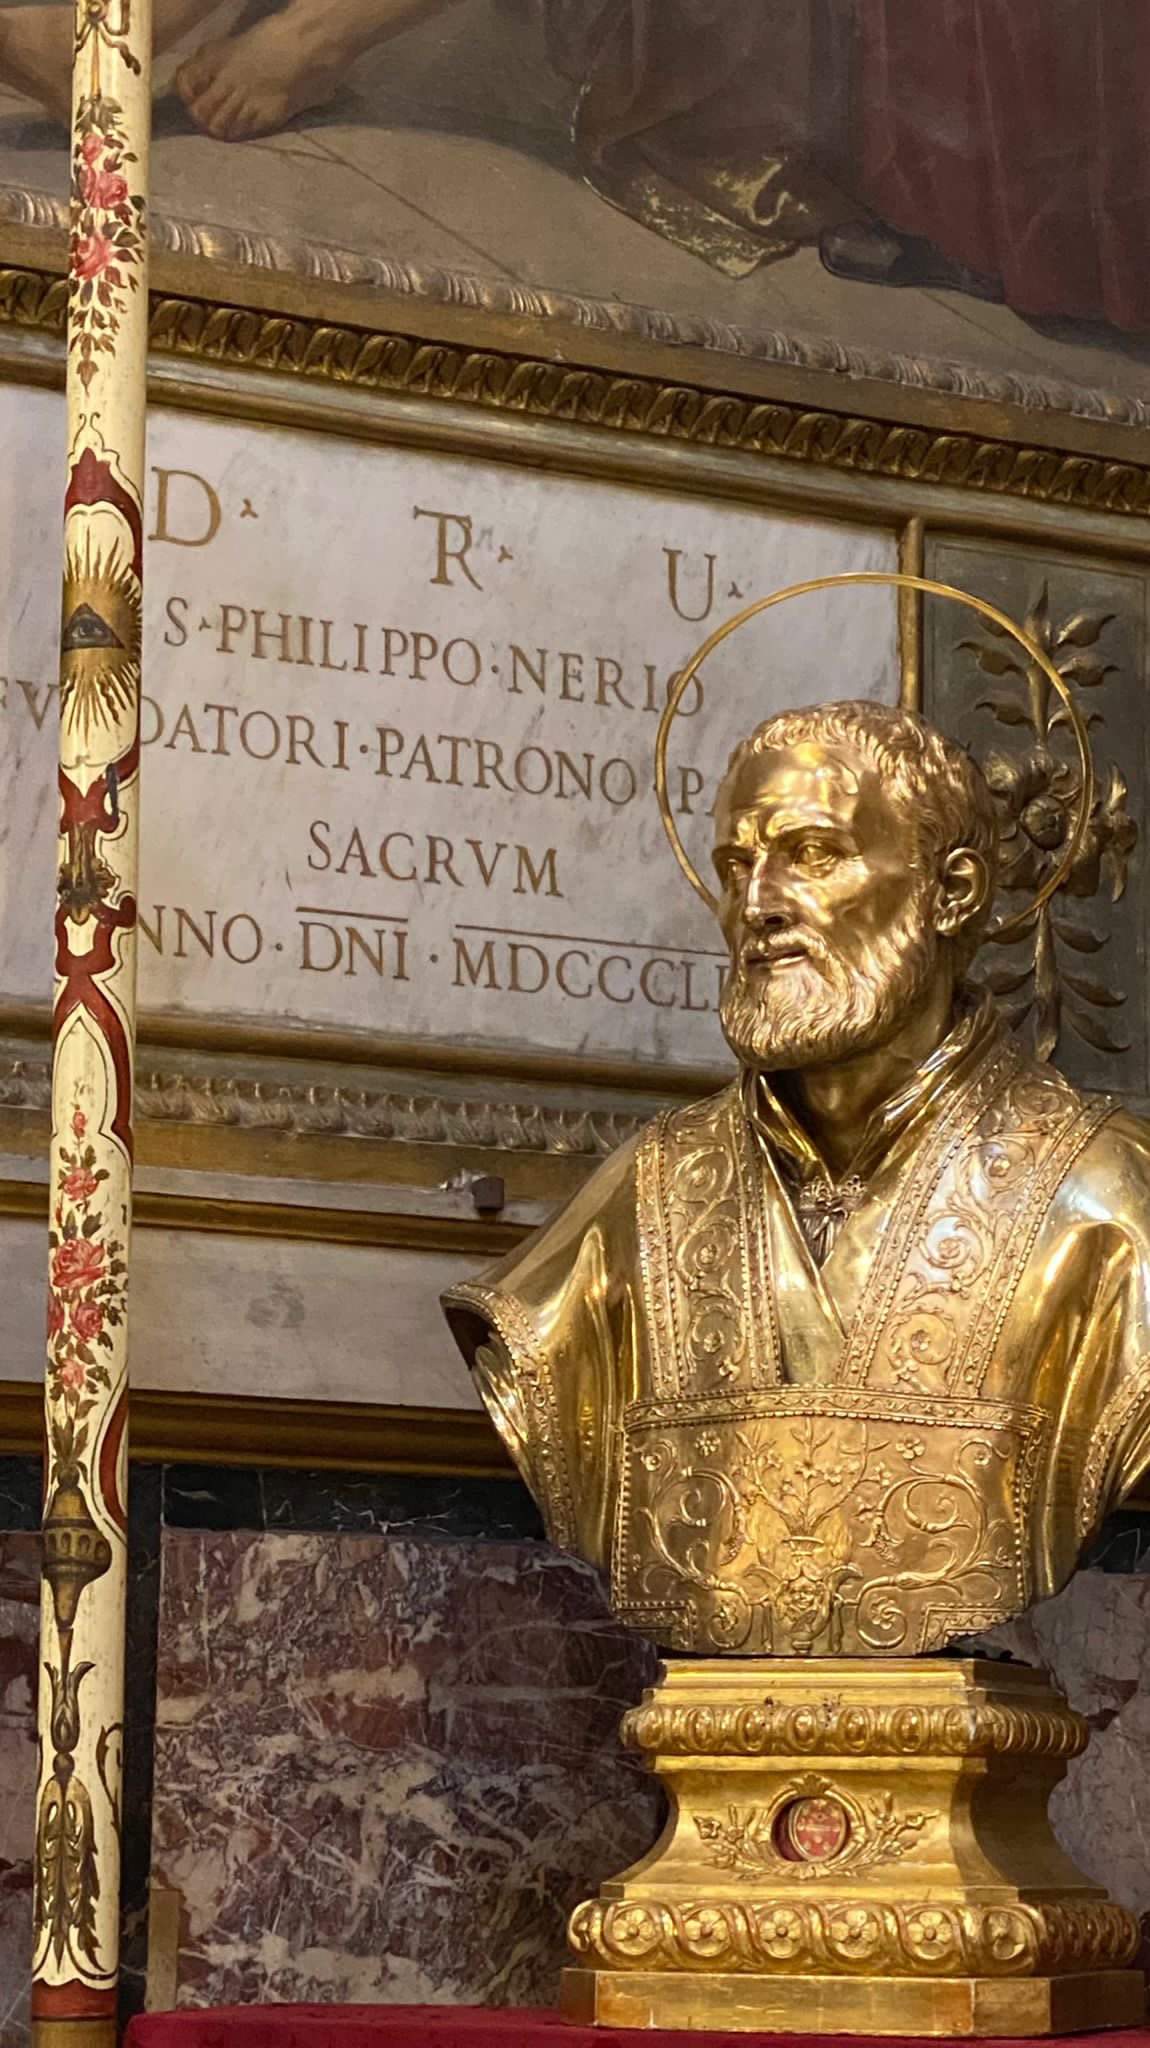 St Philip Neri: an apostle for the universal call to holiness